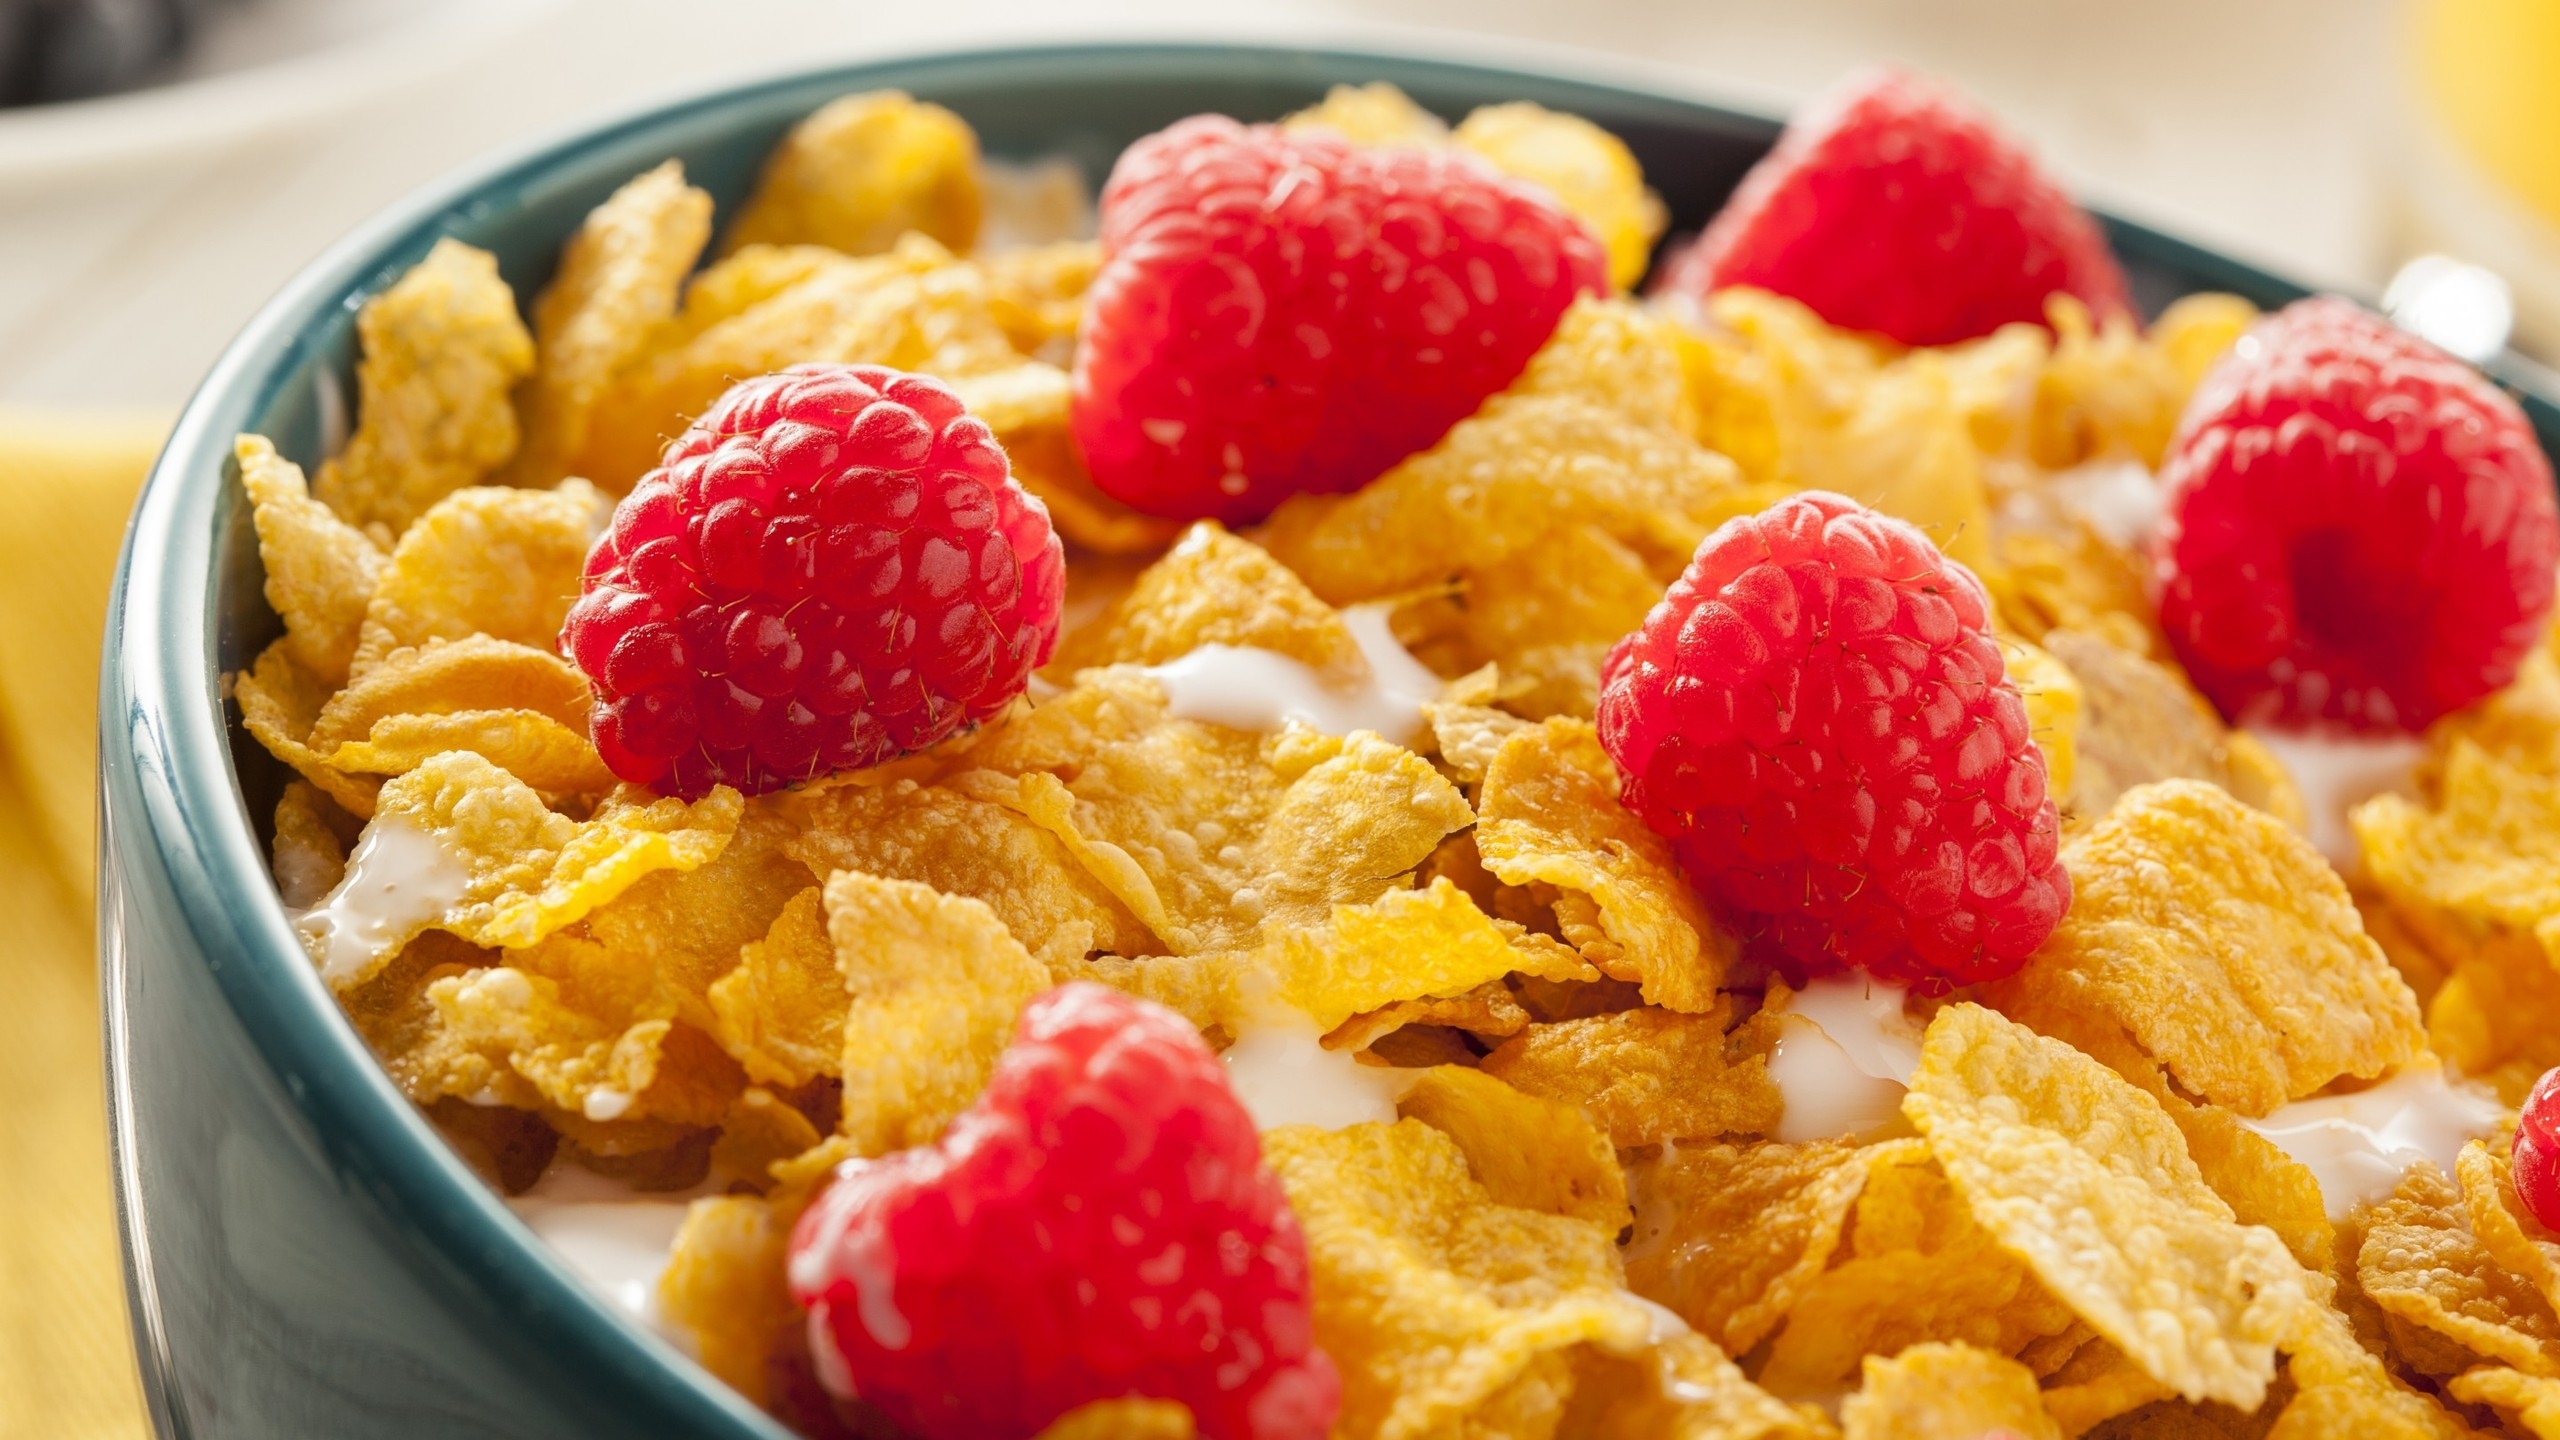 Cereals with Raspberries  for 2560x1440 HDTV resolution